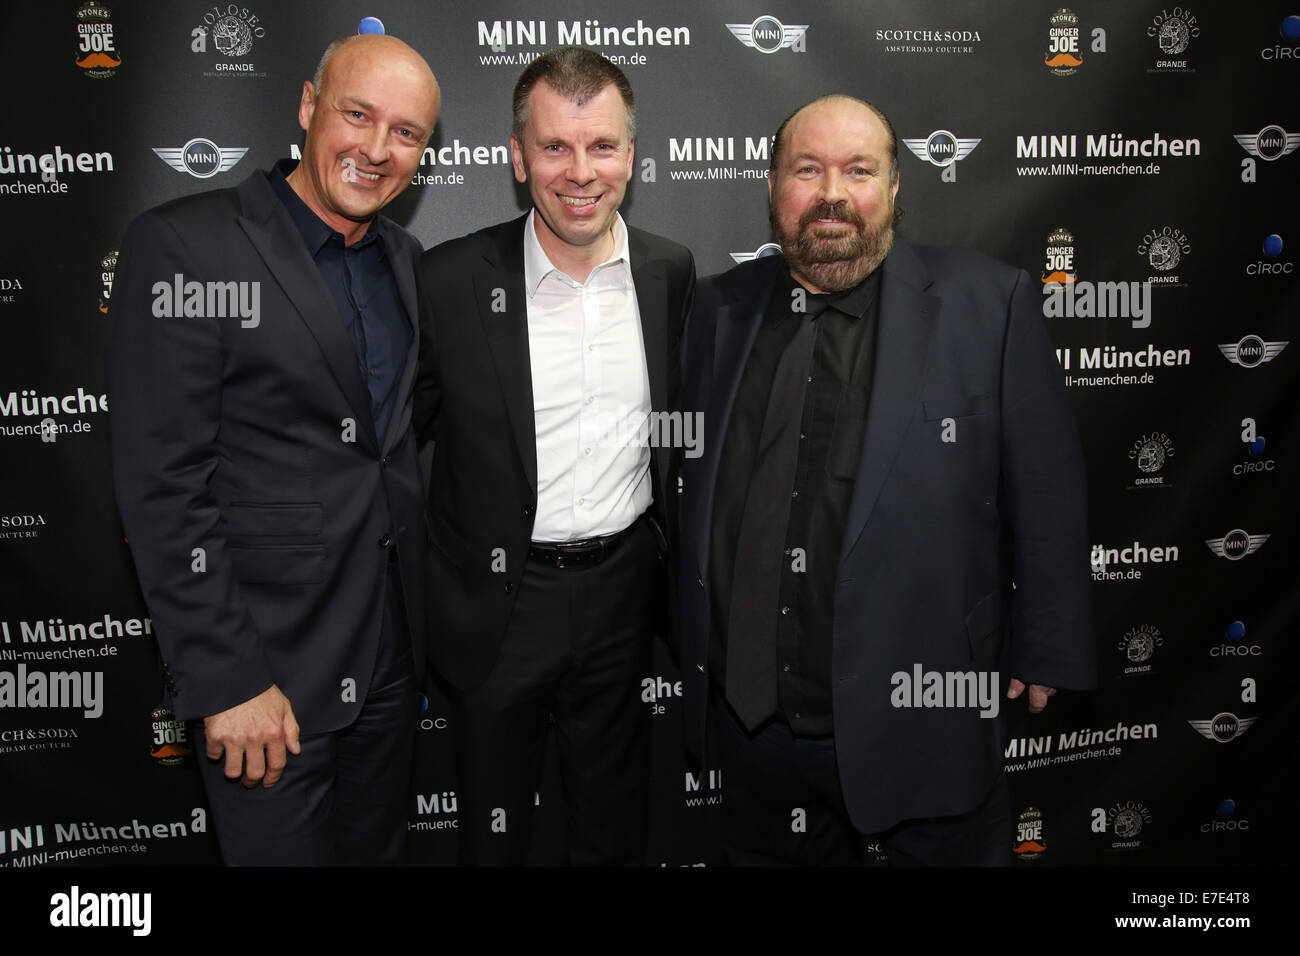 Celebrities attending the presentation of the new BMW Mini model at Kesselhaus.  Featuring: Rudolf Leberfing,Peter Mey,Wolfgang Lippert Where: Munich, Germany When: 13 Mar 2014 Stock Photo